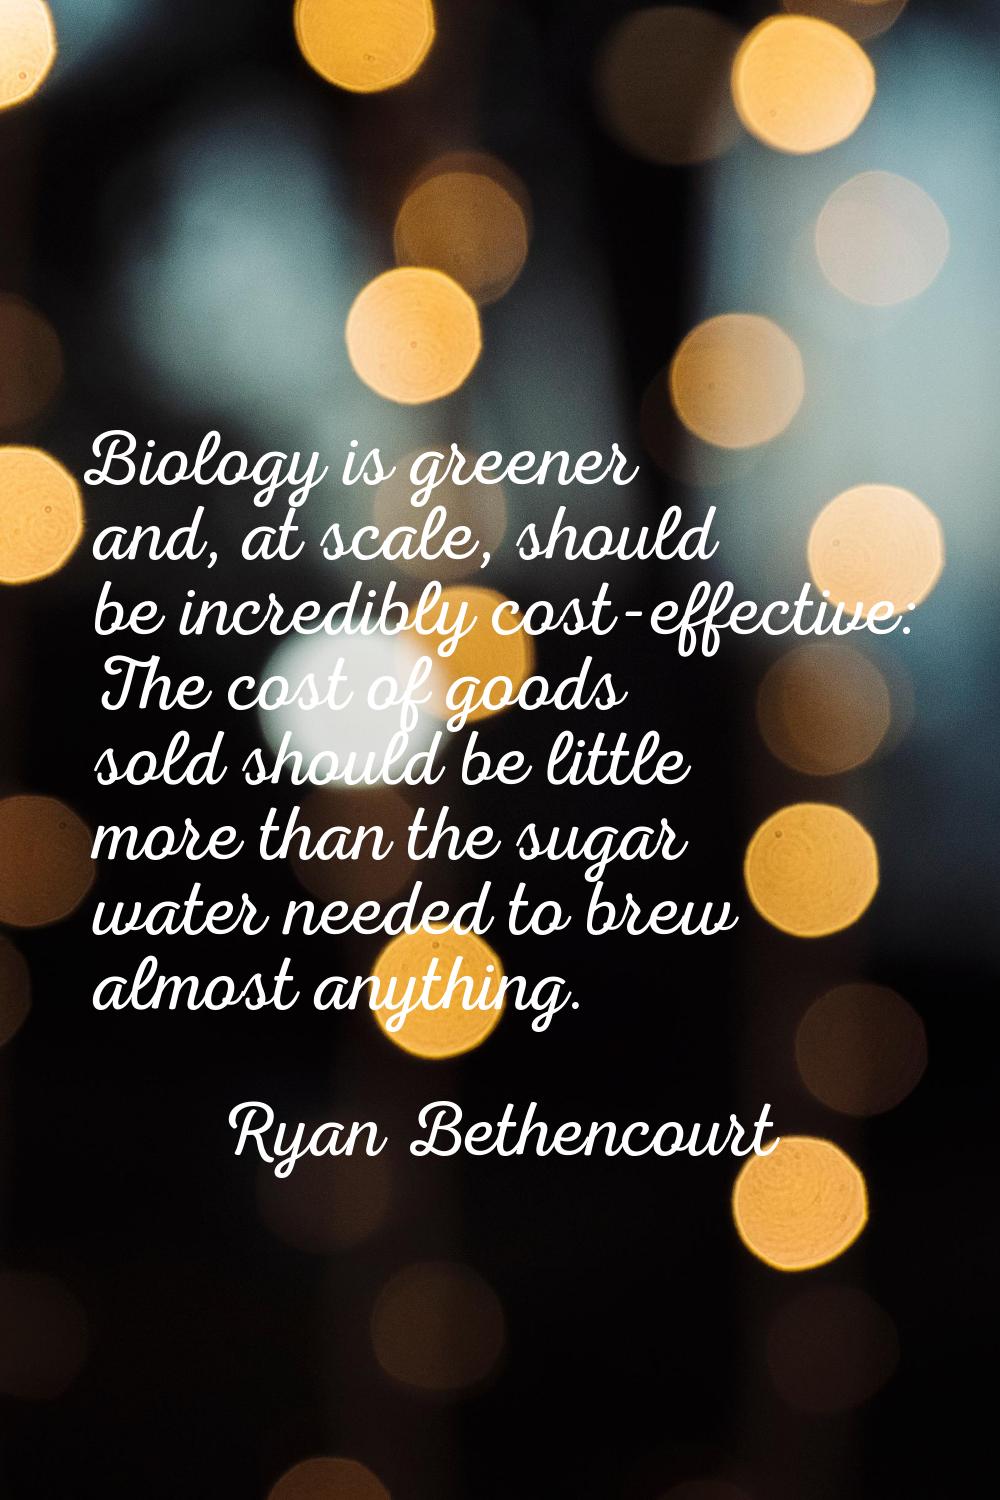 Biology is greener and, at scale, should be incredibly cost-effective: The cost of goods sold shoul